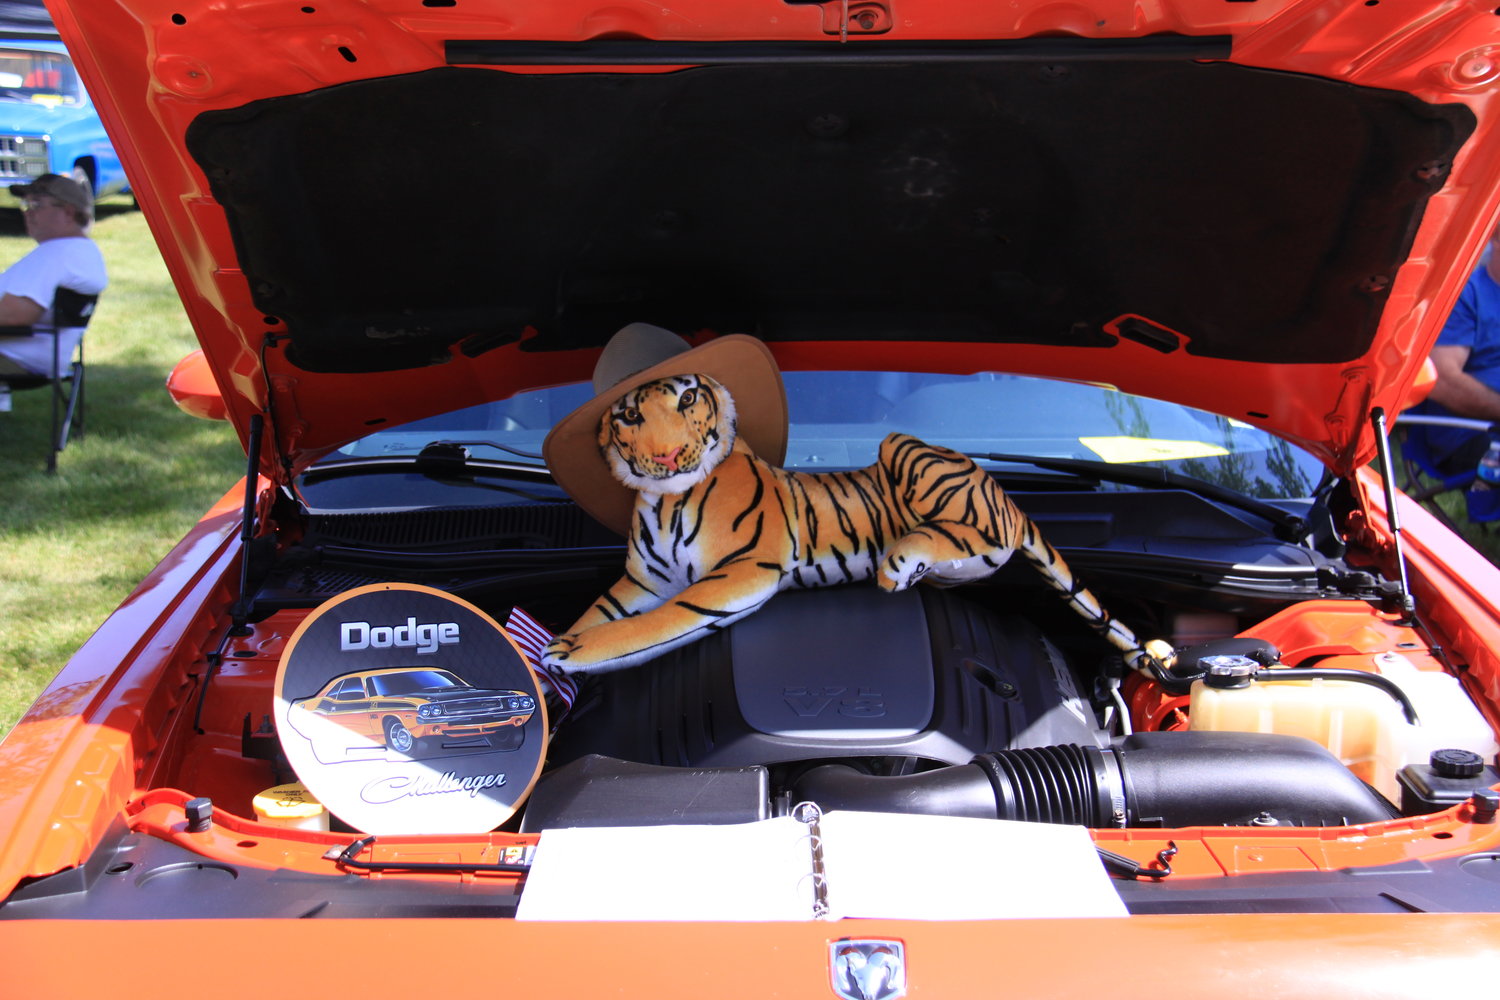 Orange you glad this menacing tiger stood watch over this shiny Dodge Challenger at the Graf & Sons Car Show at the Mexico Elks Lodge? WE AIN'T LION